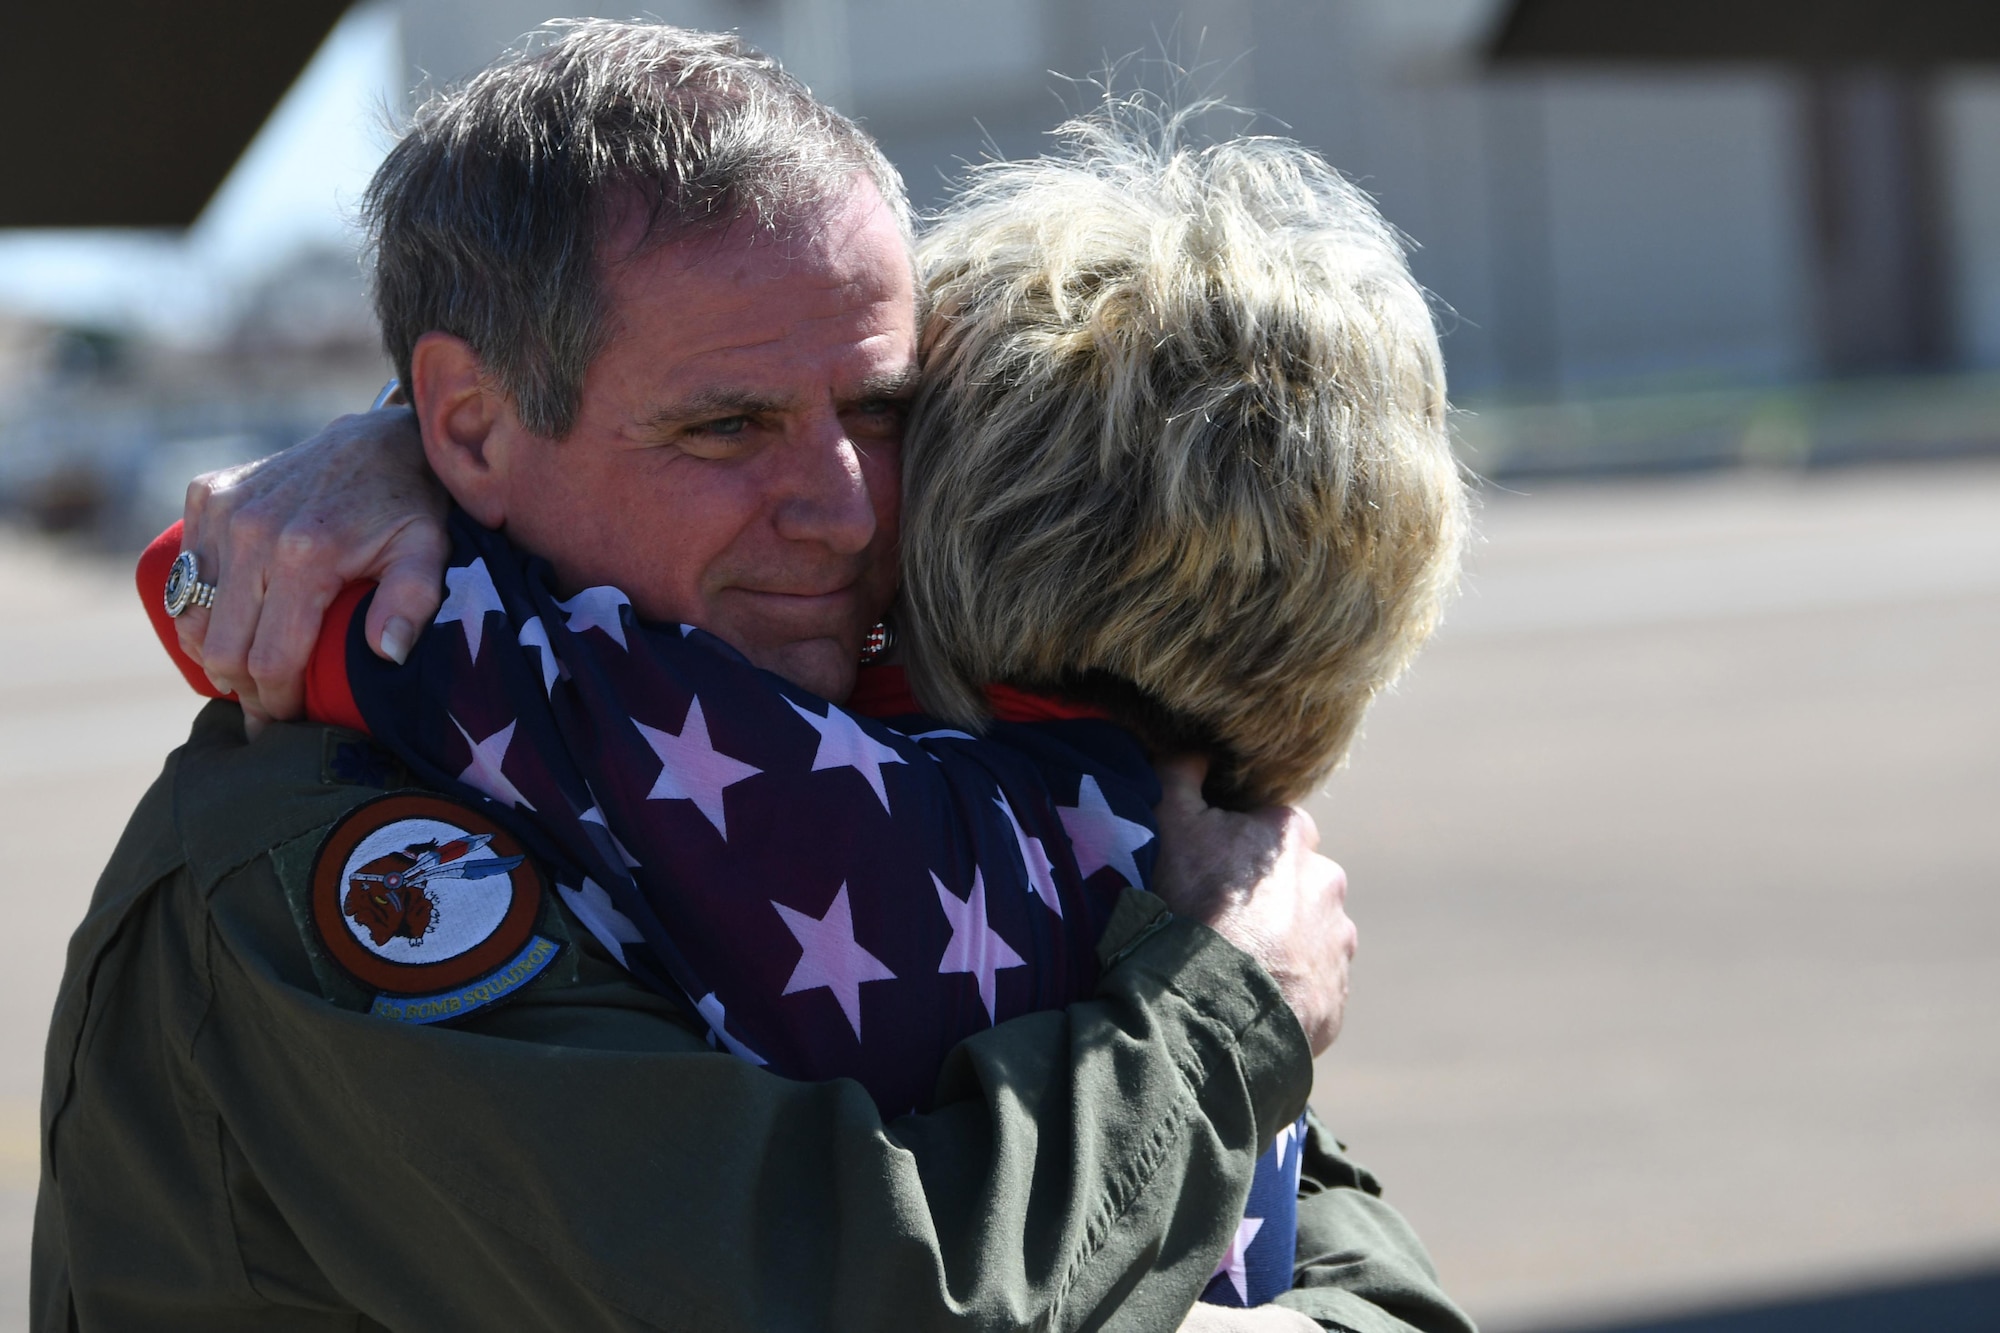 U.S. Air Force Lt. Col. Steve Smith hugs his wife, Jayne, after returning from a training mission at Barksdale Air Force, La., March 3, 2017. During the mission, Smith surpassed 10,000 flight hours in the B-52 Stratofortress. He is a veteran of 1,800 missions and multiple combat deployments. (U.S. Air Force photo by Tech. Sgt. Ted Daigle/Released)